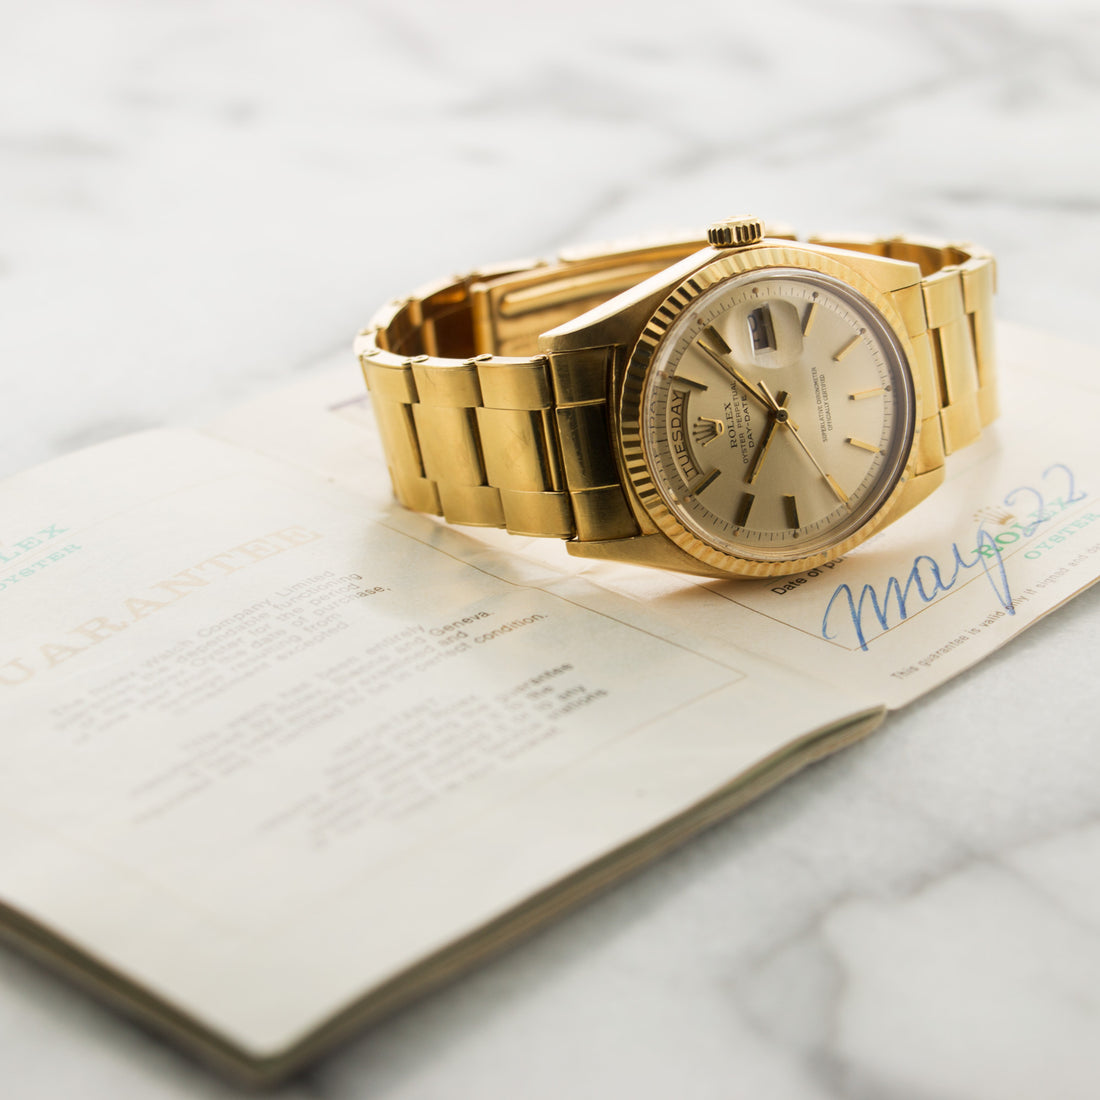 Rolex Yellow Gold Day-Date Watch Ref. 1803 with Original Booklet